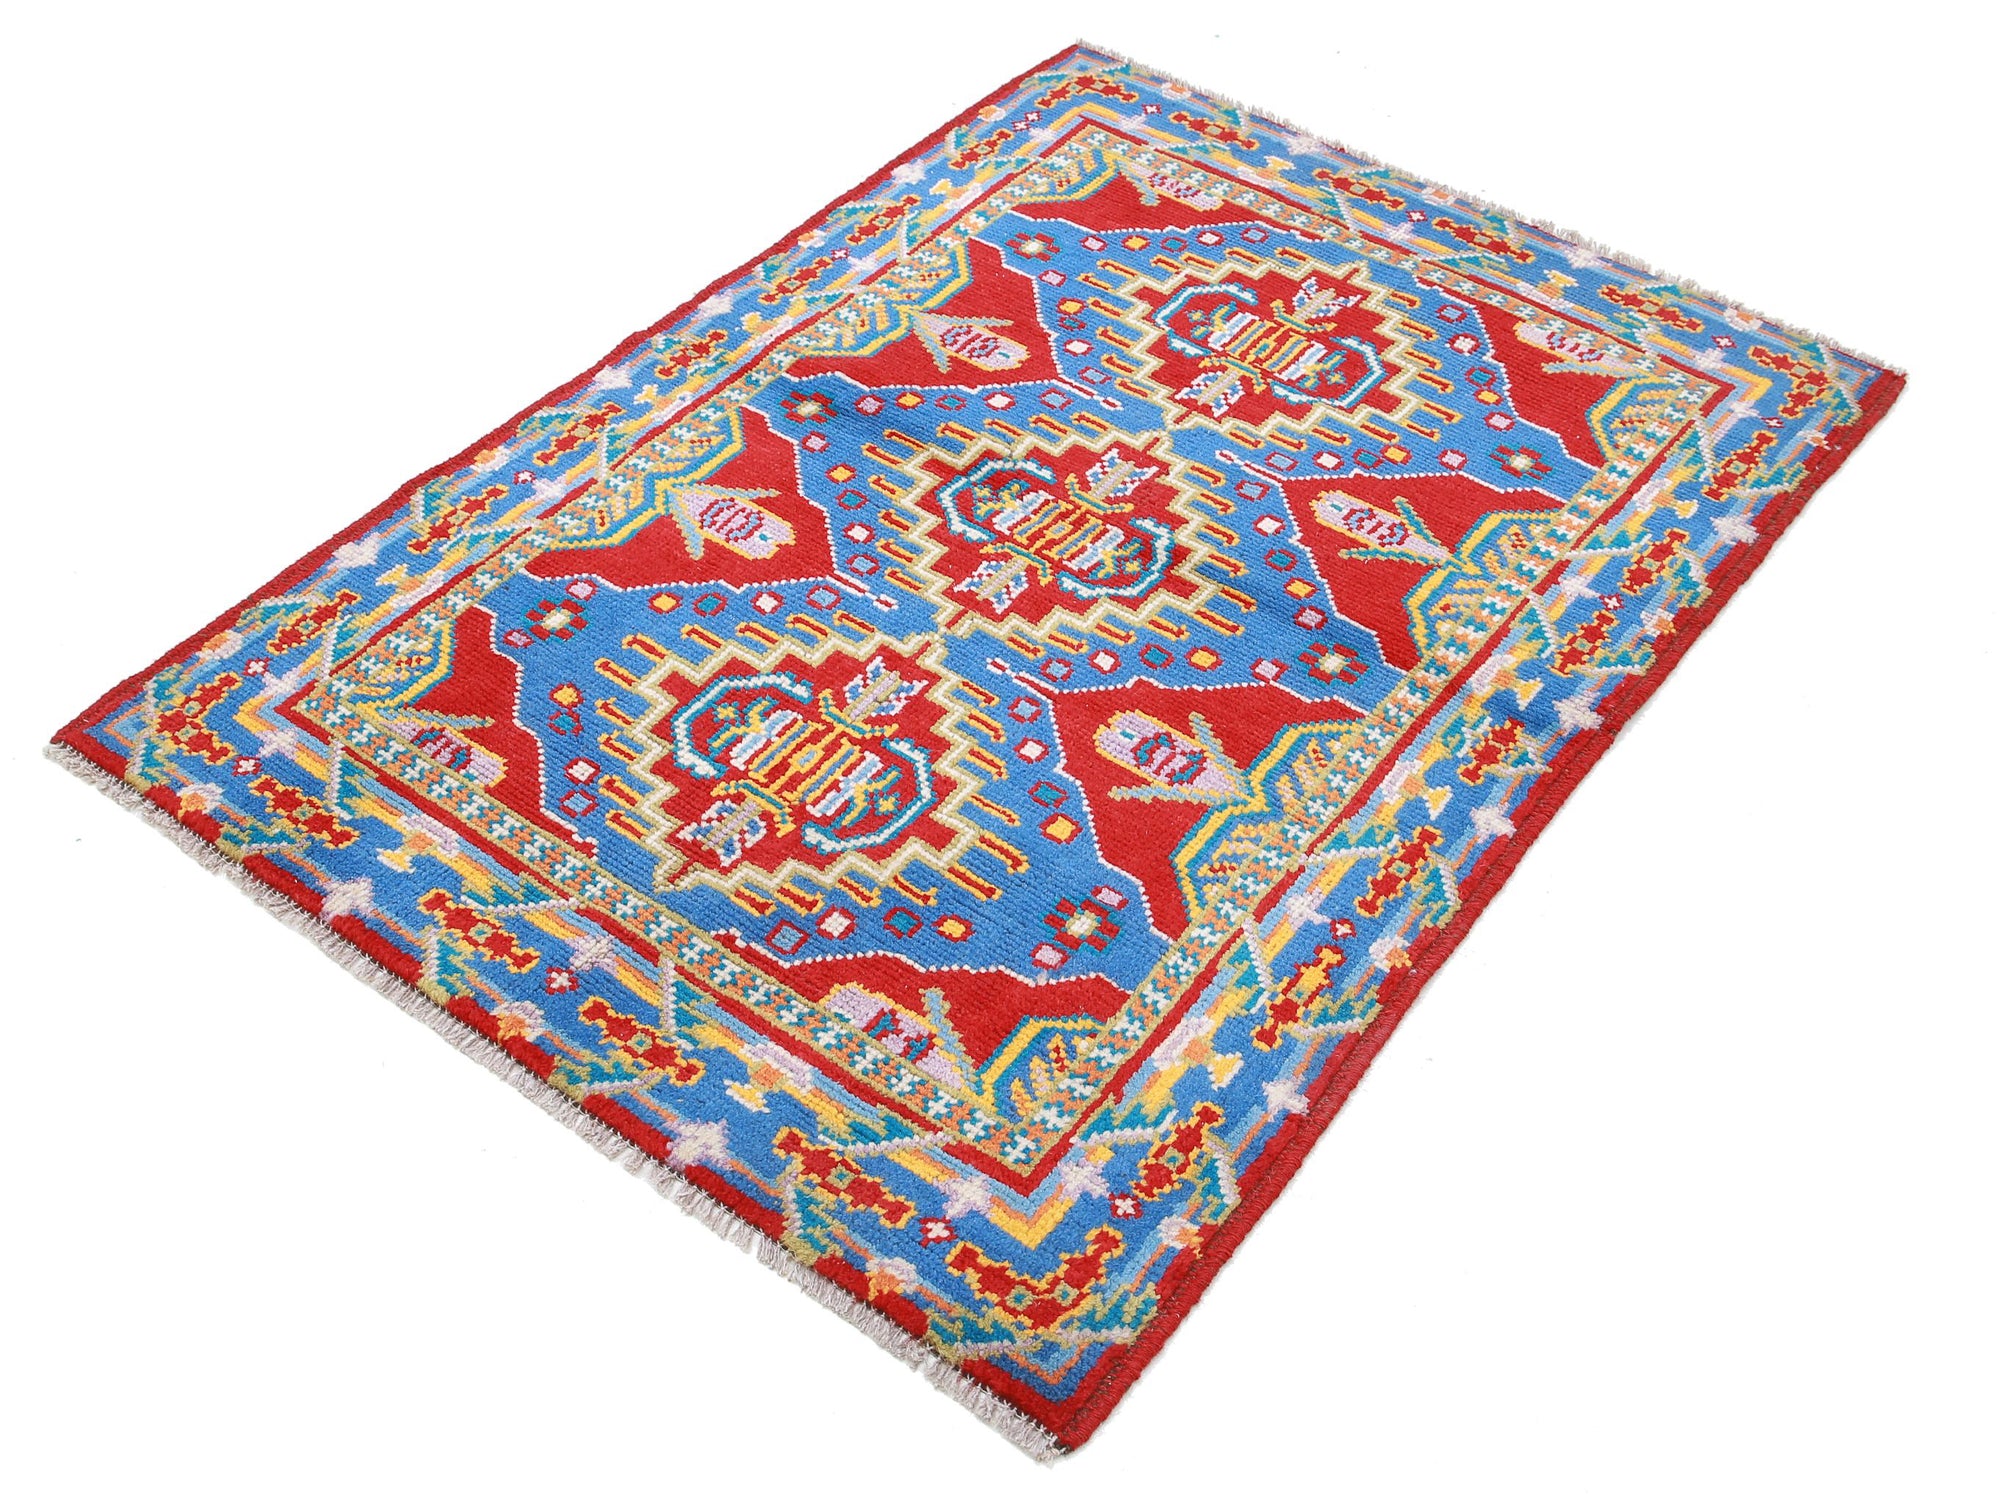 Revival-hand-knotted-qarghani-wool-rug-5014207-2.jpg